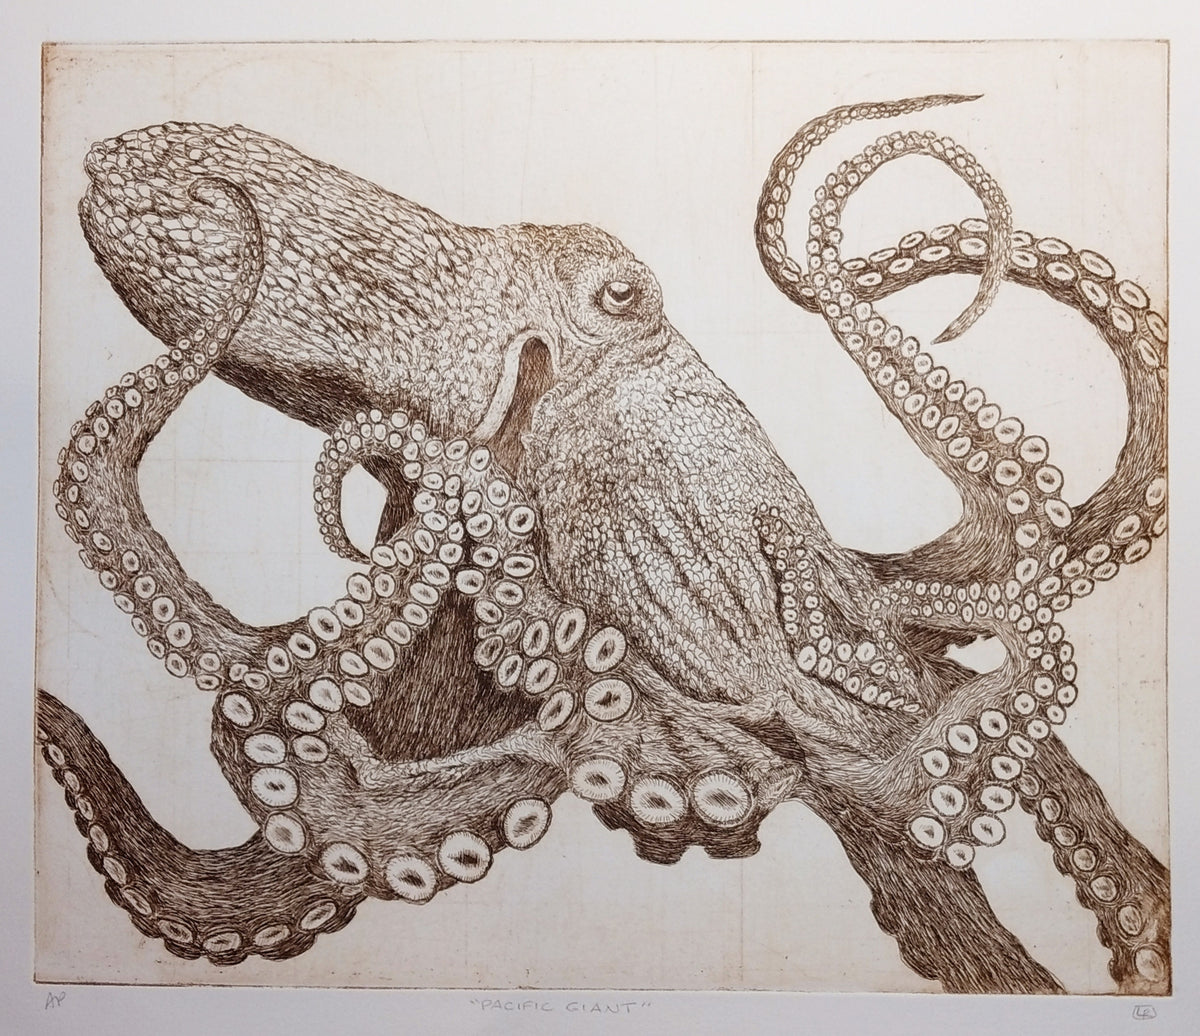 Pacific Giant Octopus - Sepia Edition